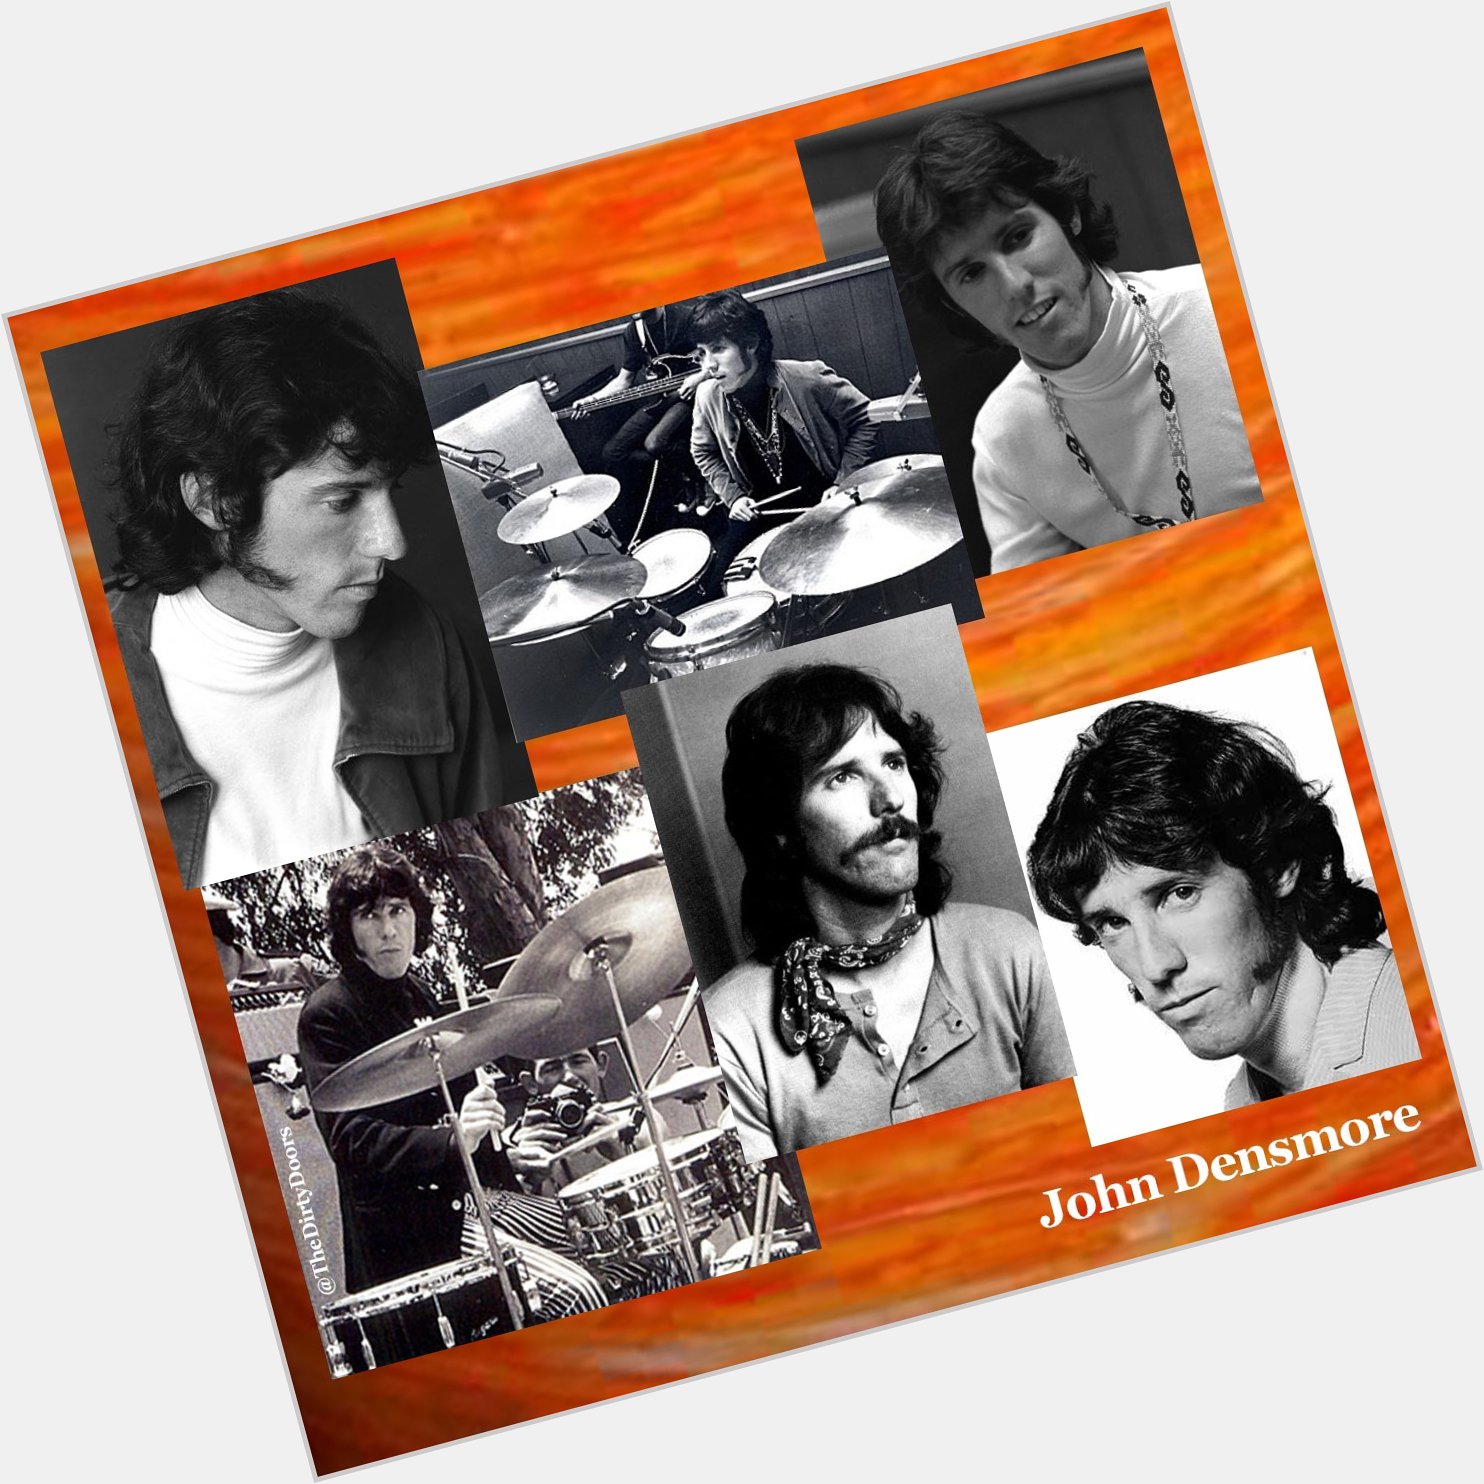 Happy Birthday to the one and only John Densmore! An amazing drummer and a true original.  